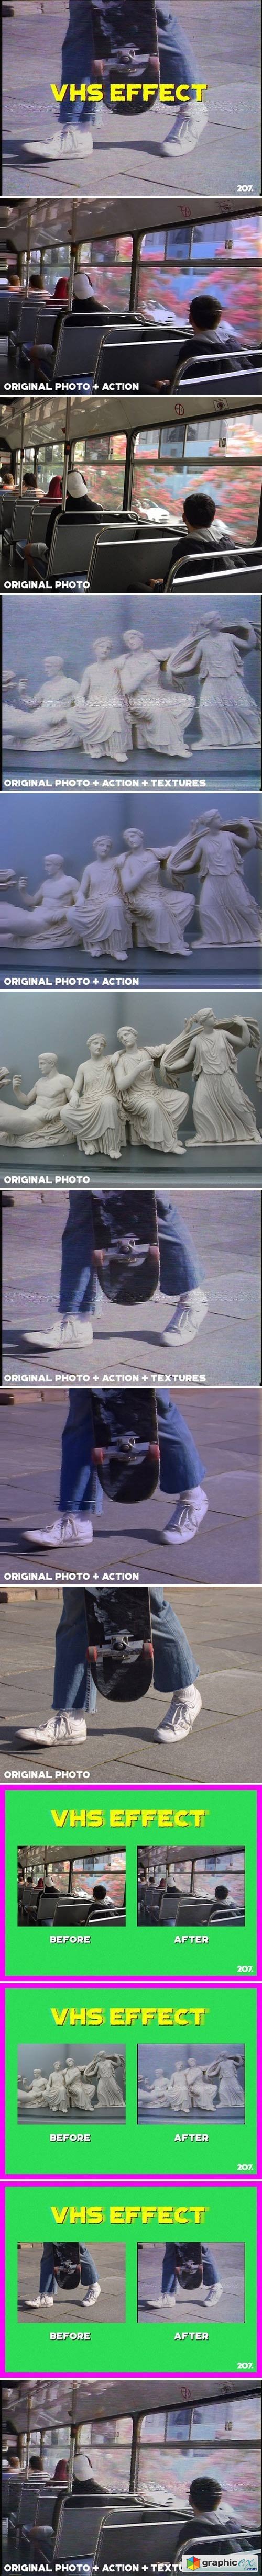 VHS EFFECT ACTION BY 2?7ART